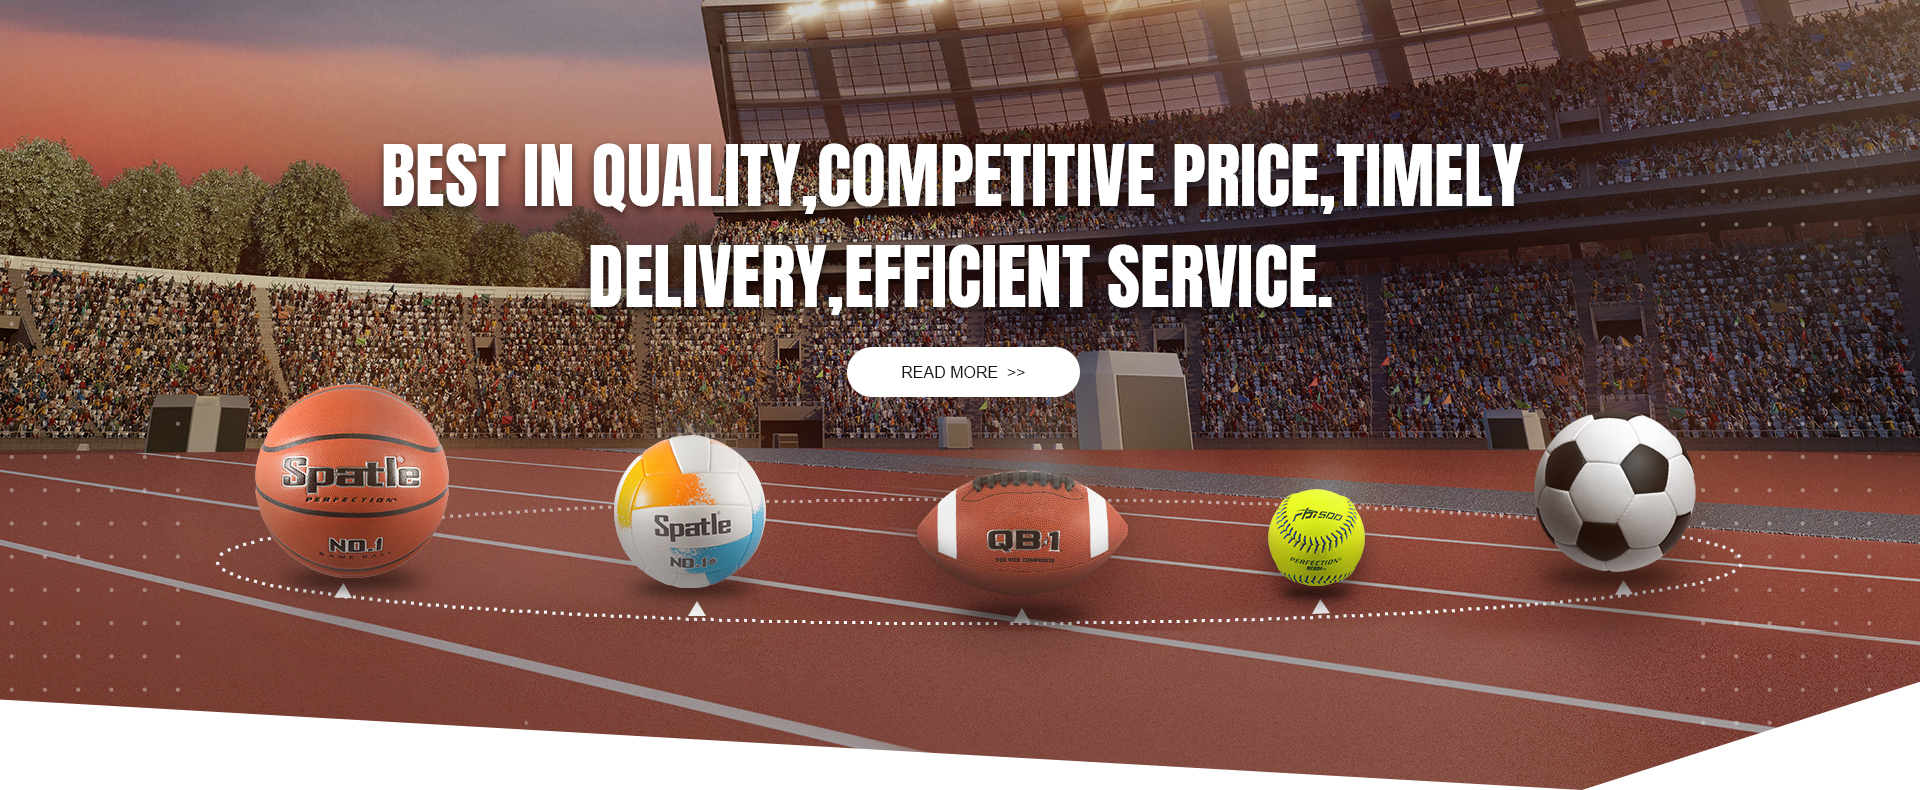 best in quality, competitive price, timely delivery, efficient service